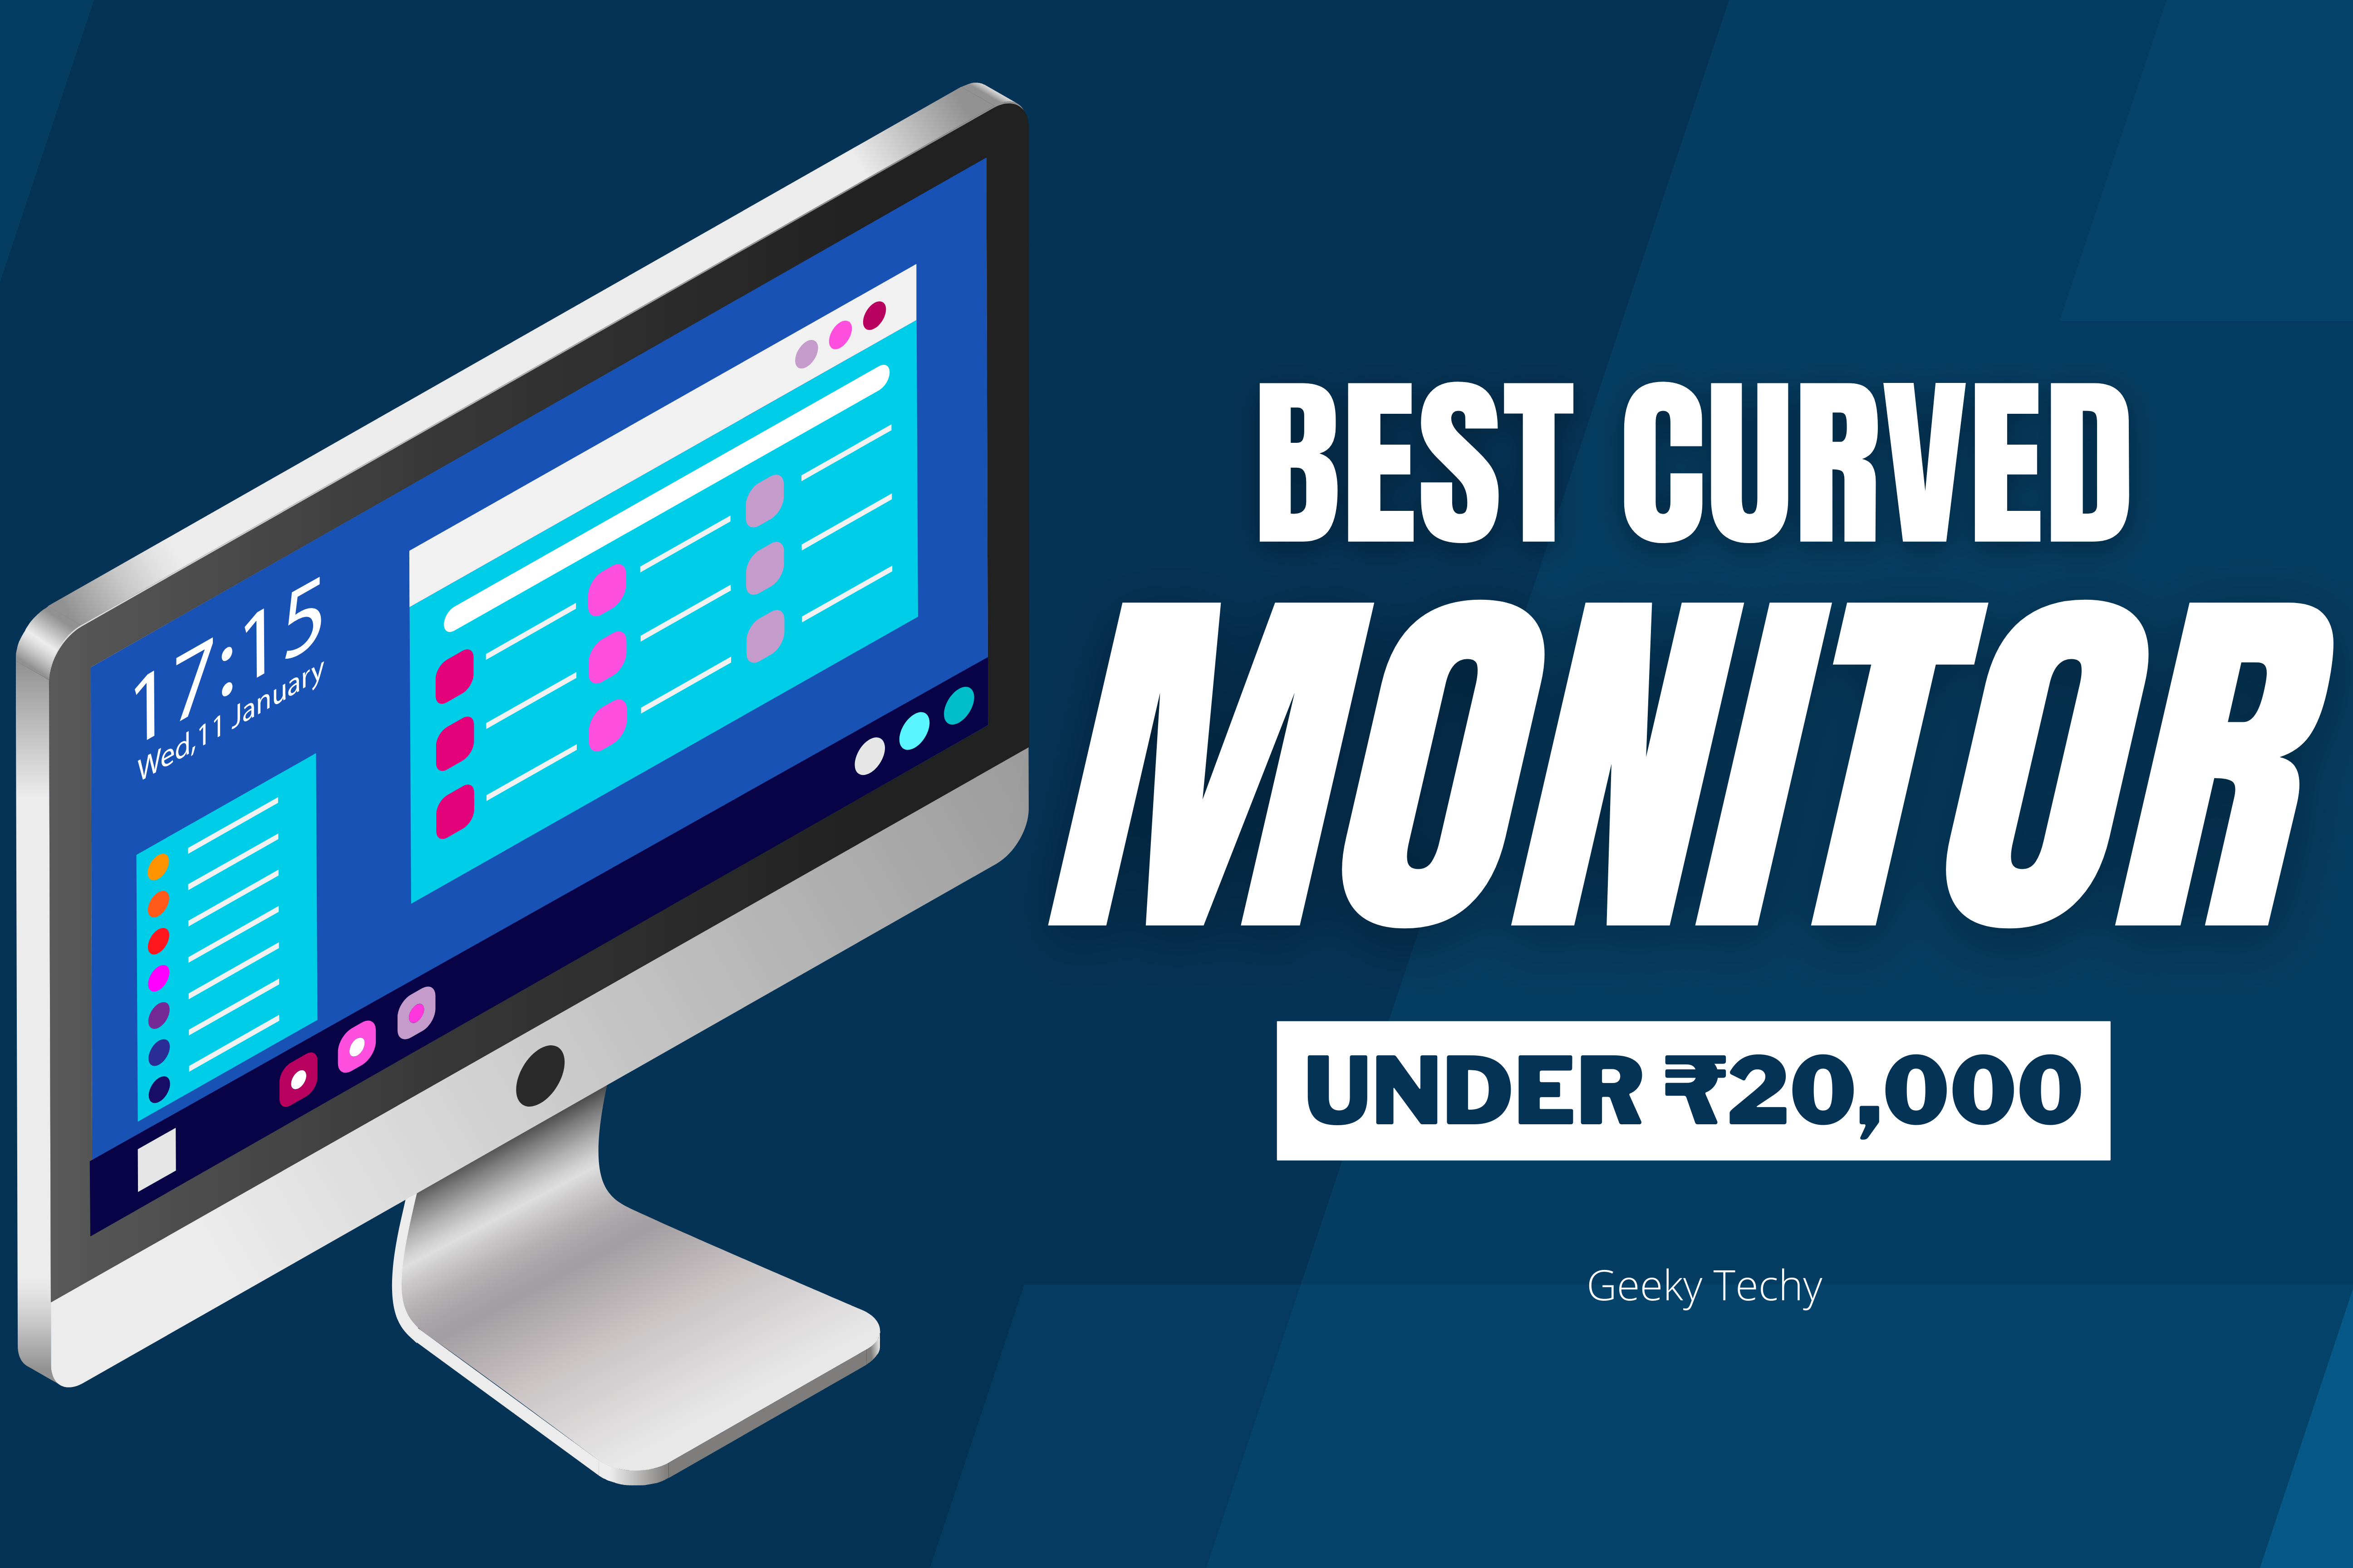 Best Curved Monitors Under Rs 20,000